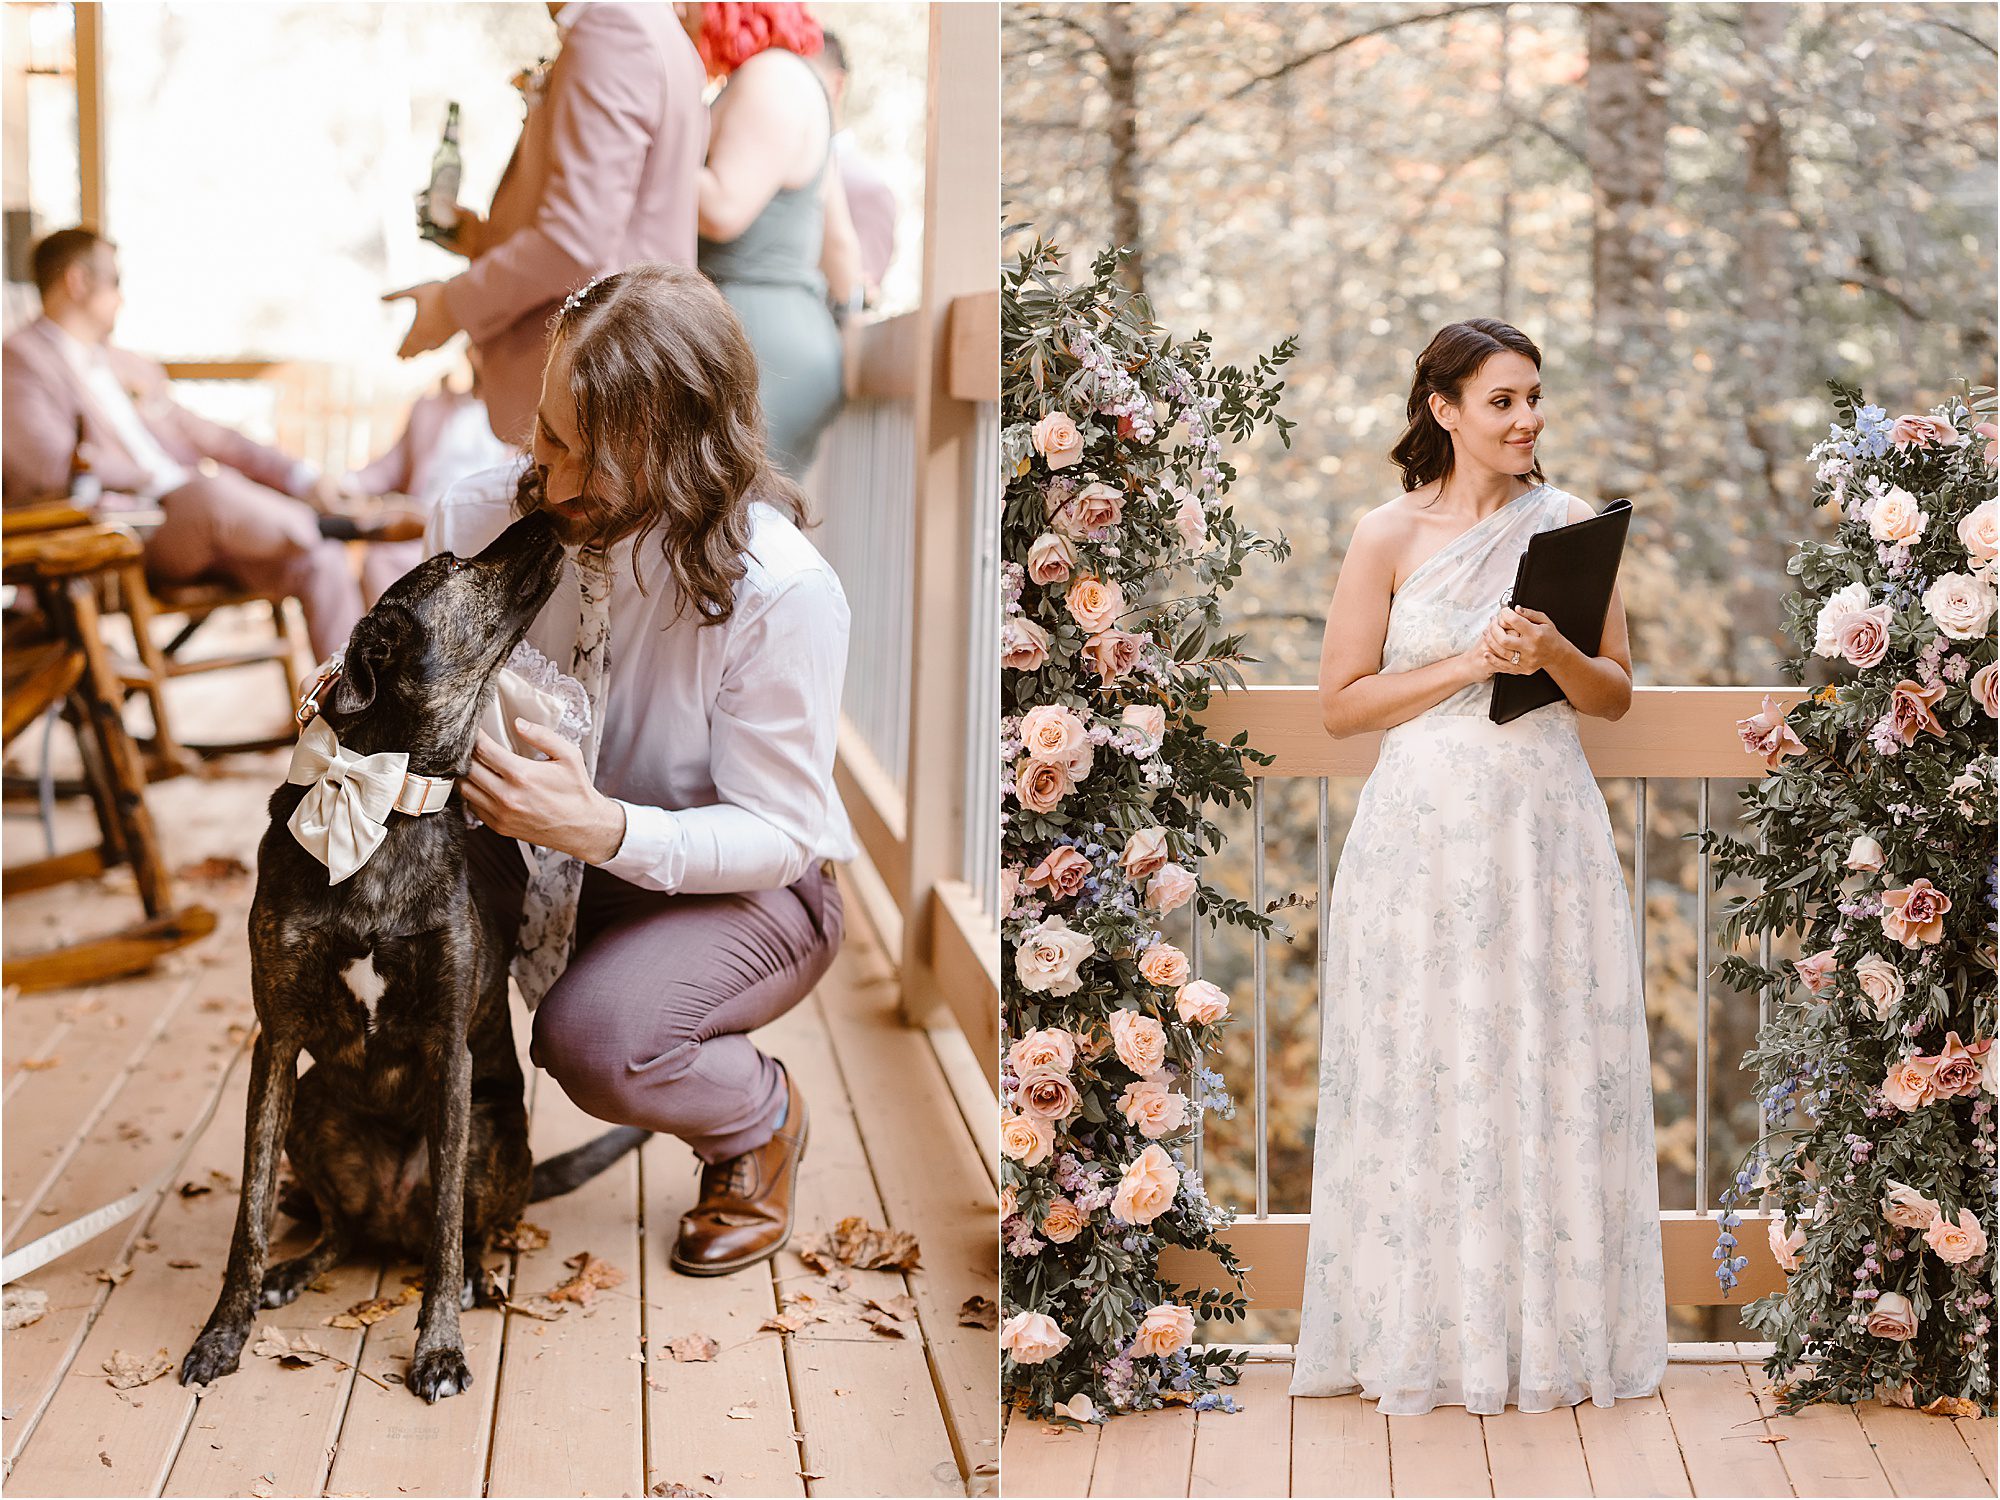 groom kisses black dog and woman stands near ceremony arbor on deck